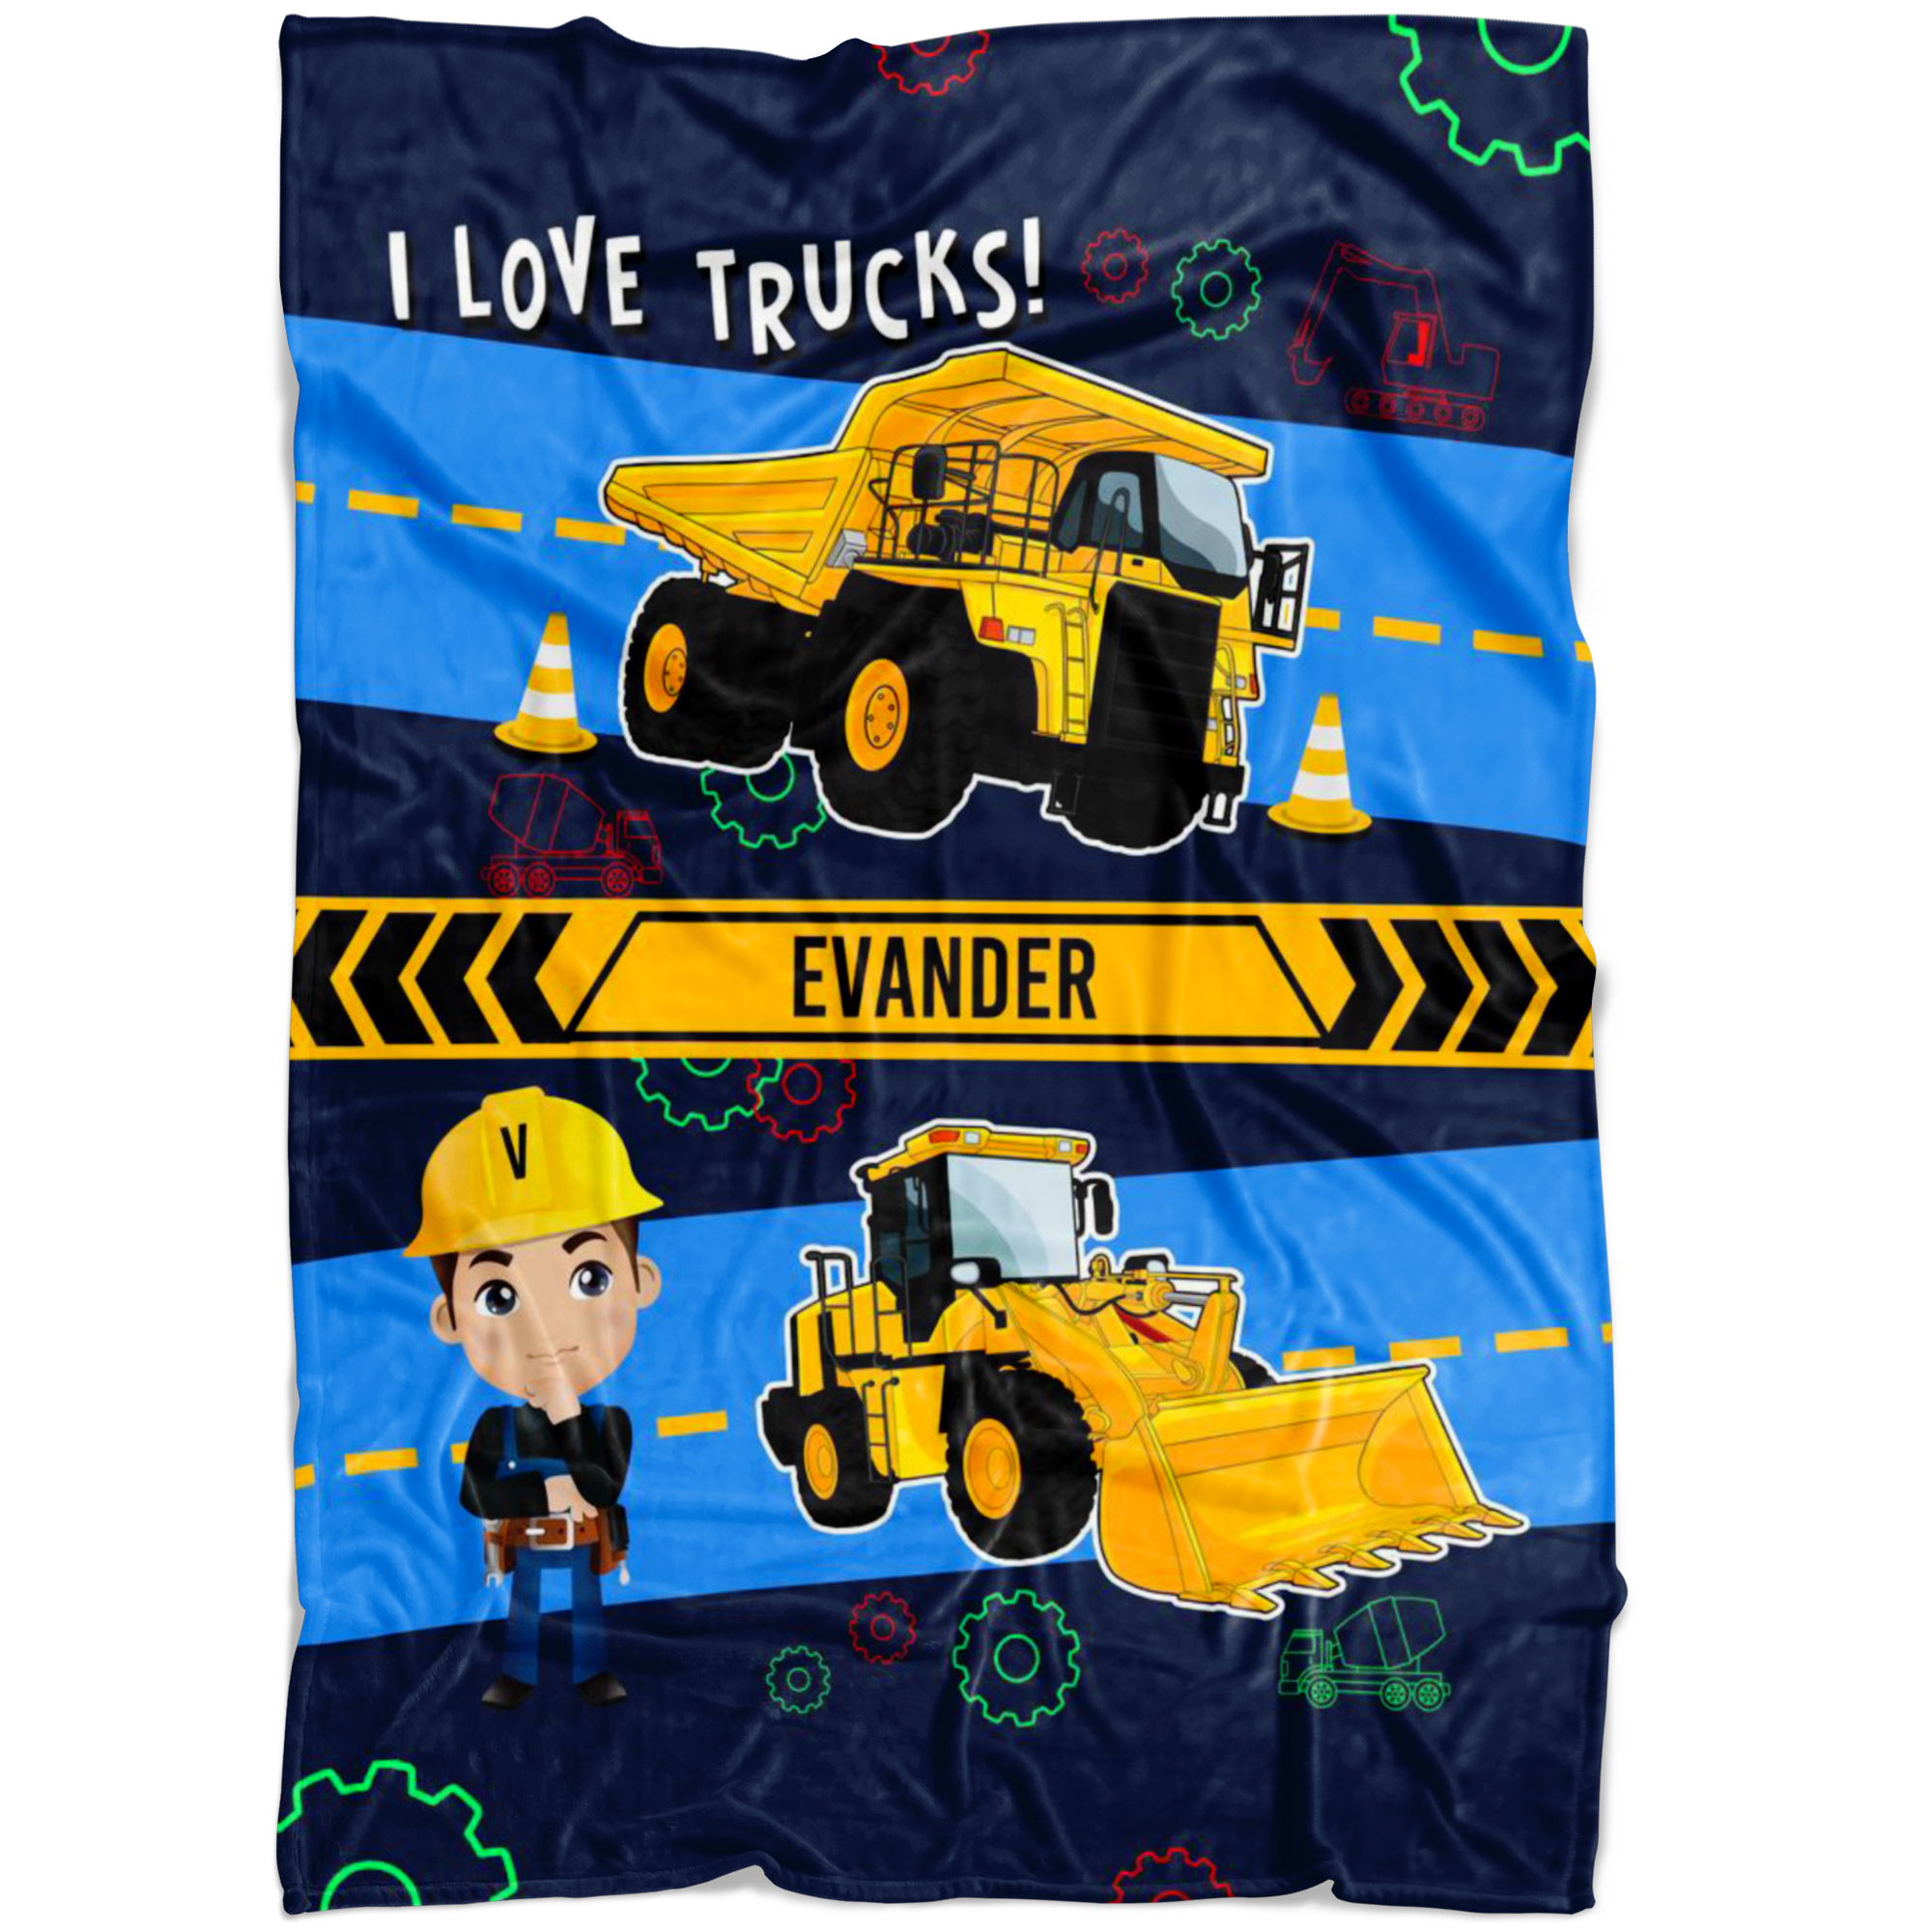 Personalized Name I Love Trucks Blanket for Boys & Girls with Character Personalization - Evander